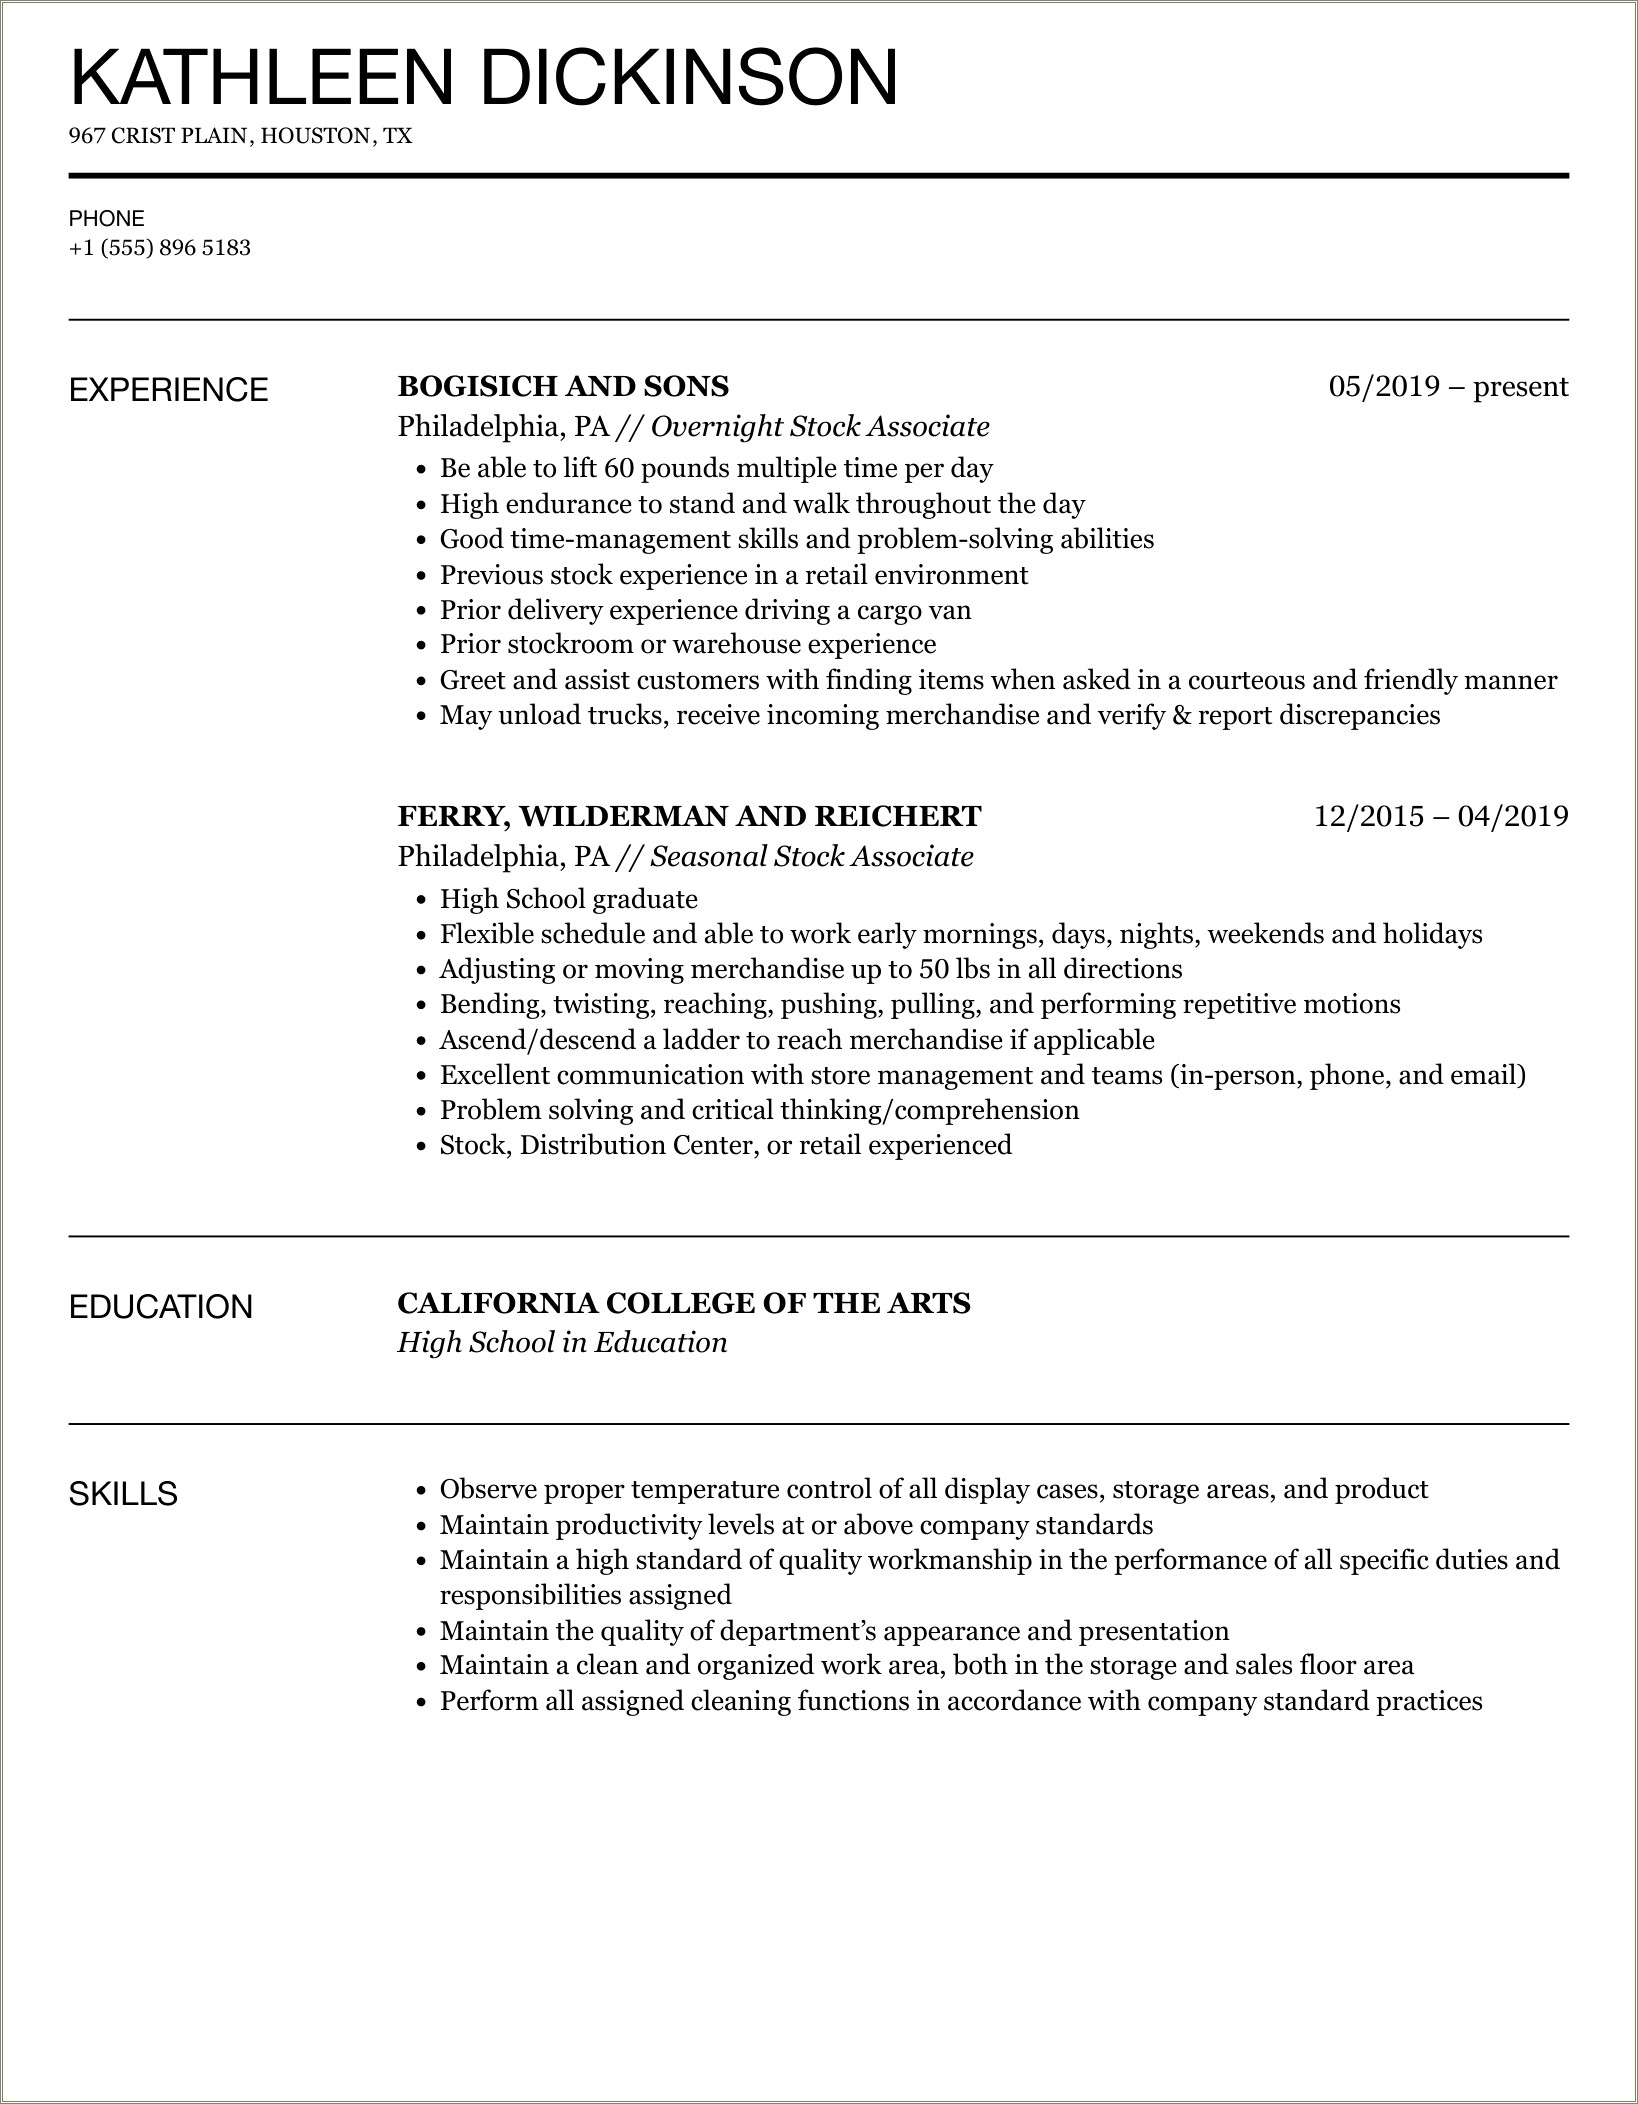 Resume Skills For Warehouse Person At Pottery